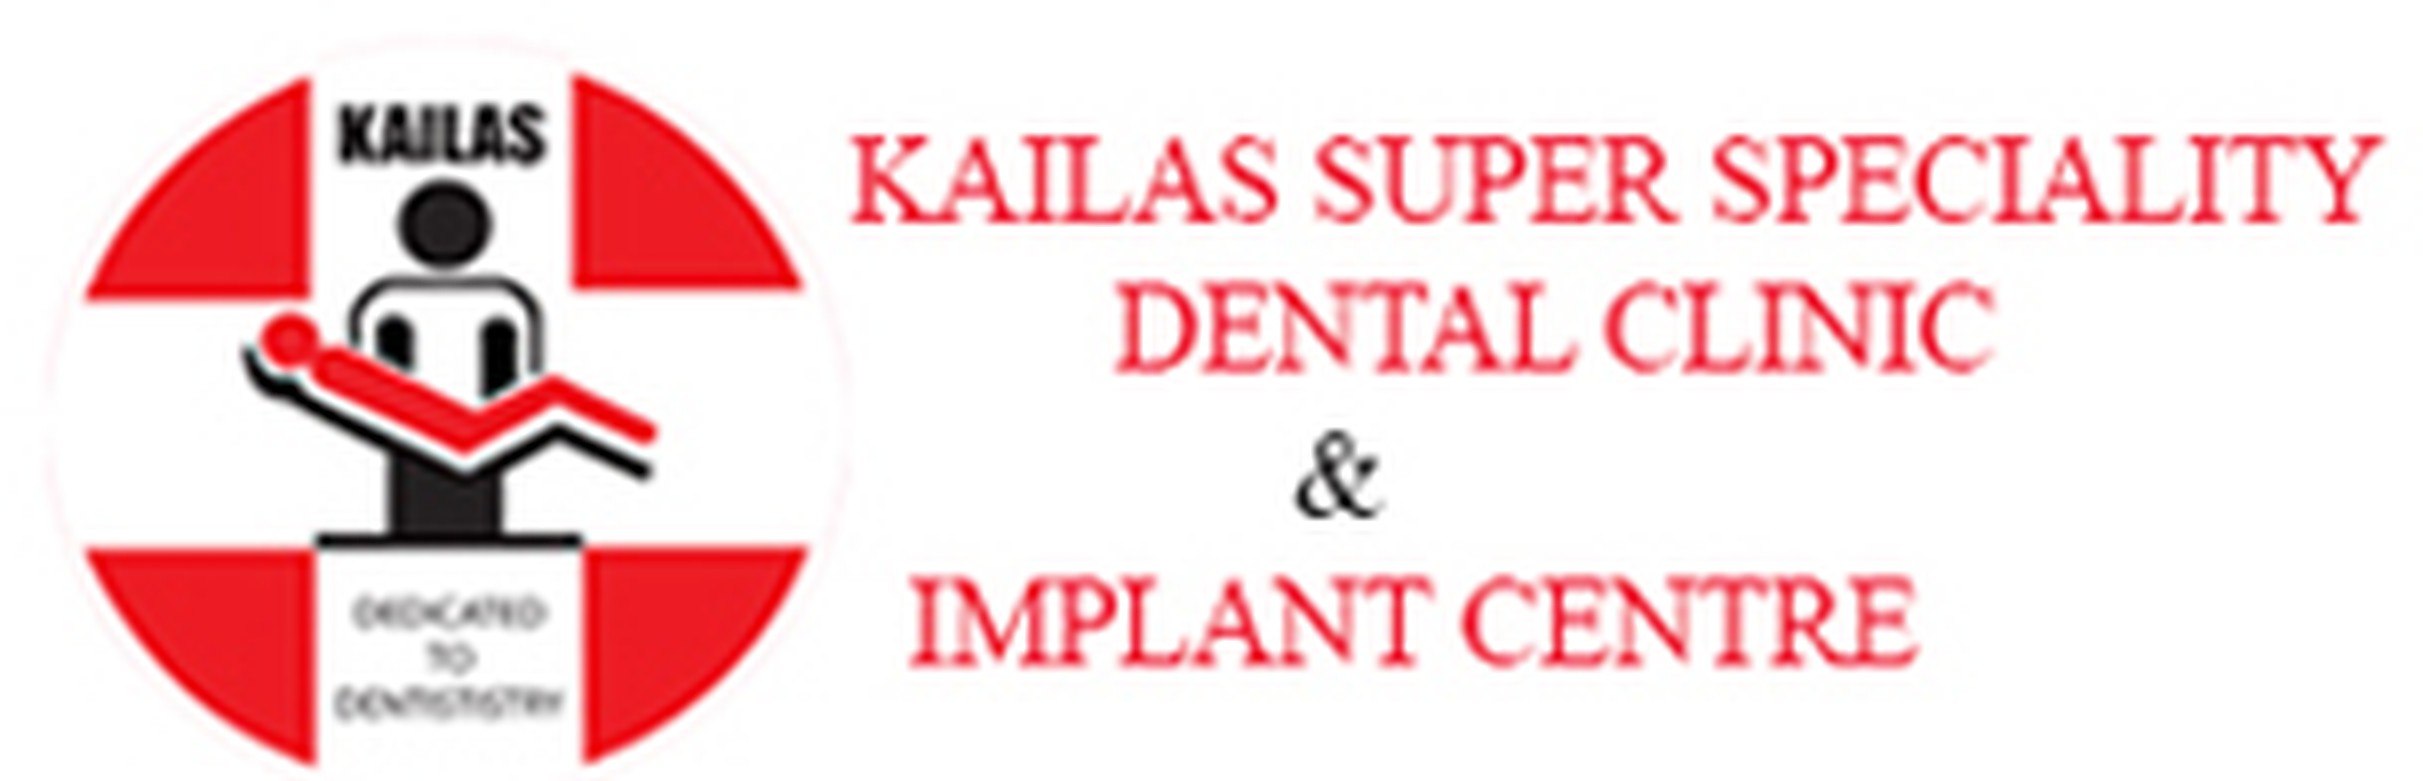 Kailas Super Speciality Dental Clinic And Implant, DENTAL CLINIC,  service in Kollam, Kollam